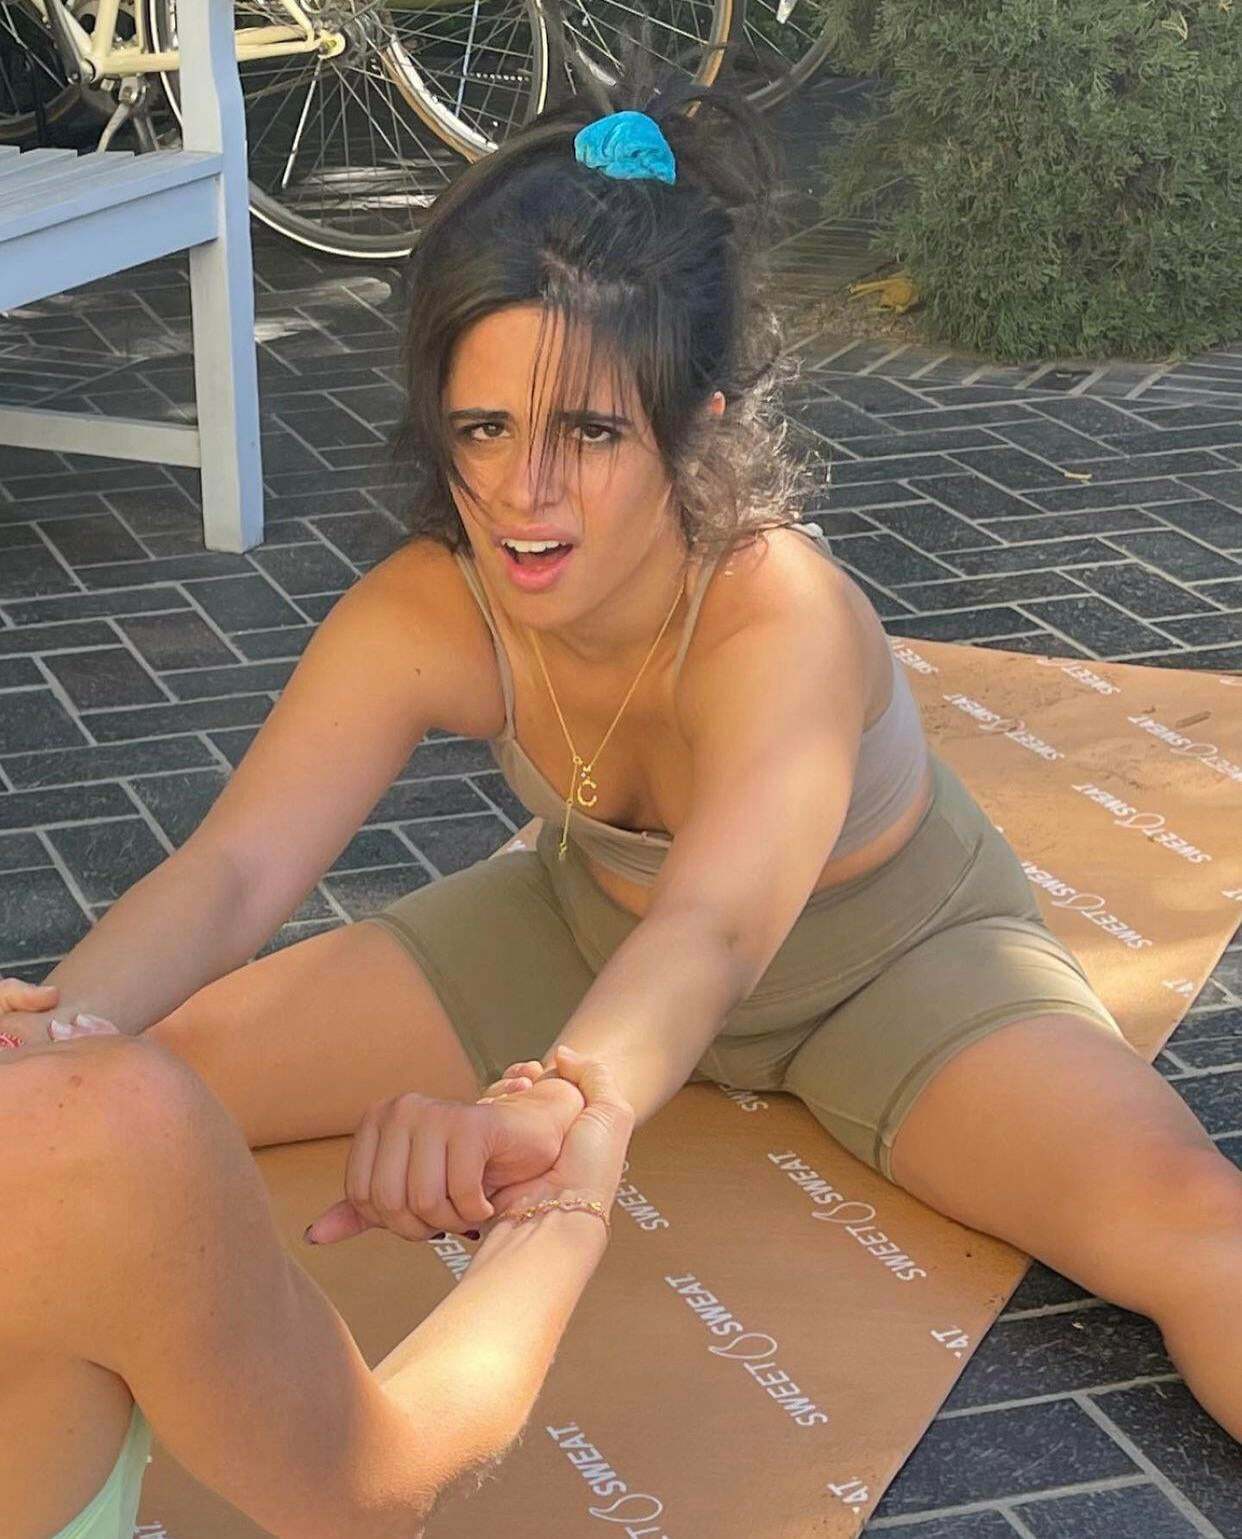 Camila Cabello stretching out